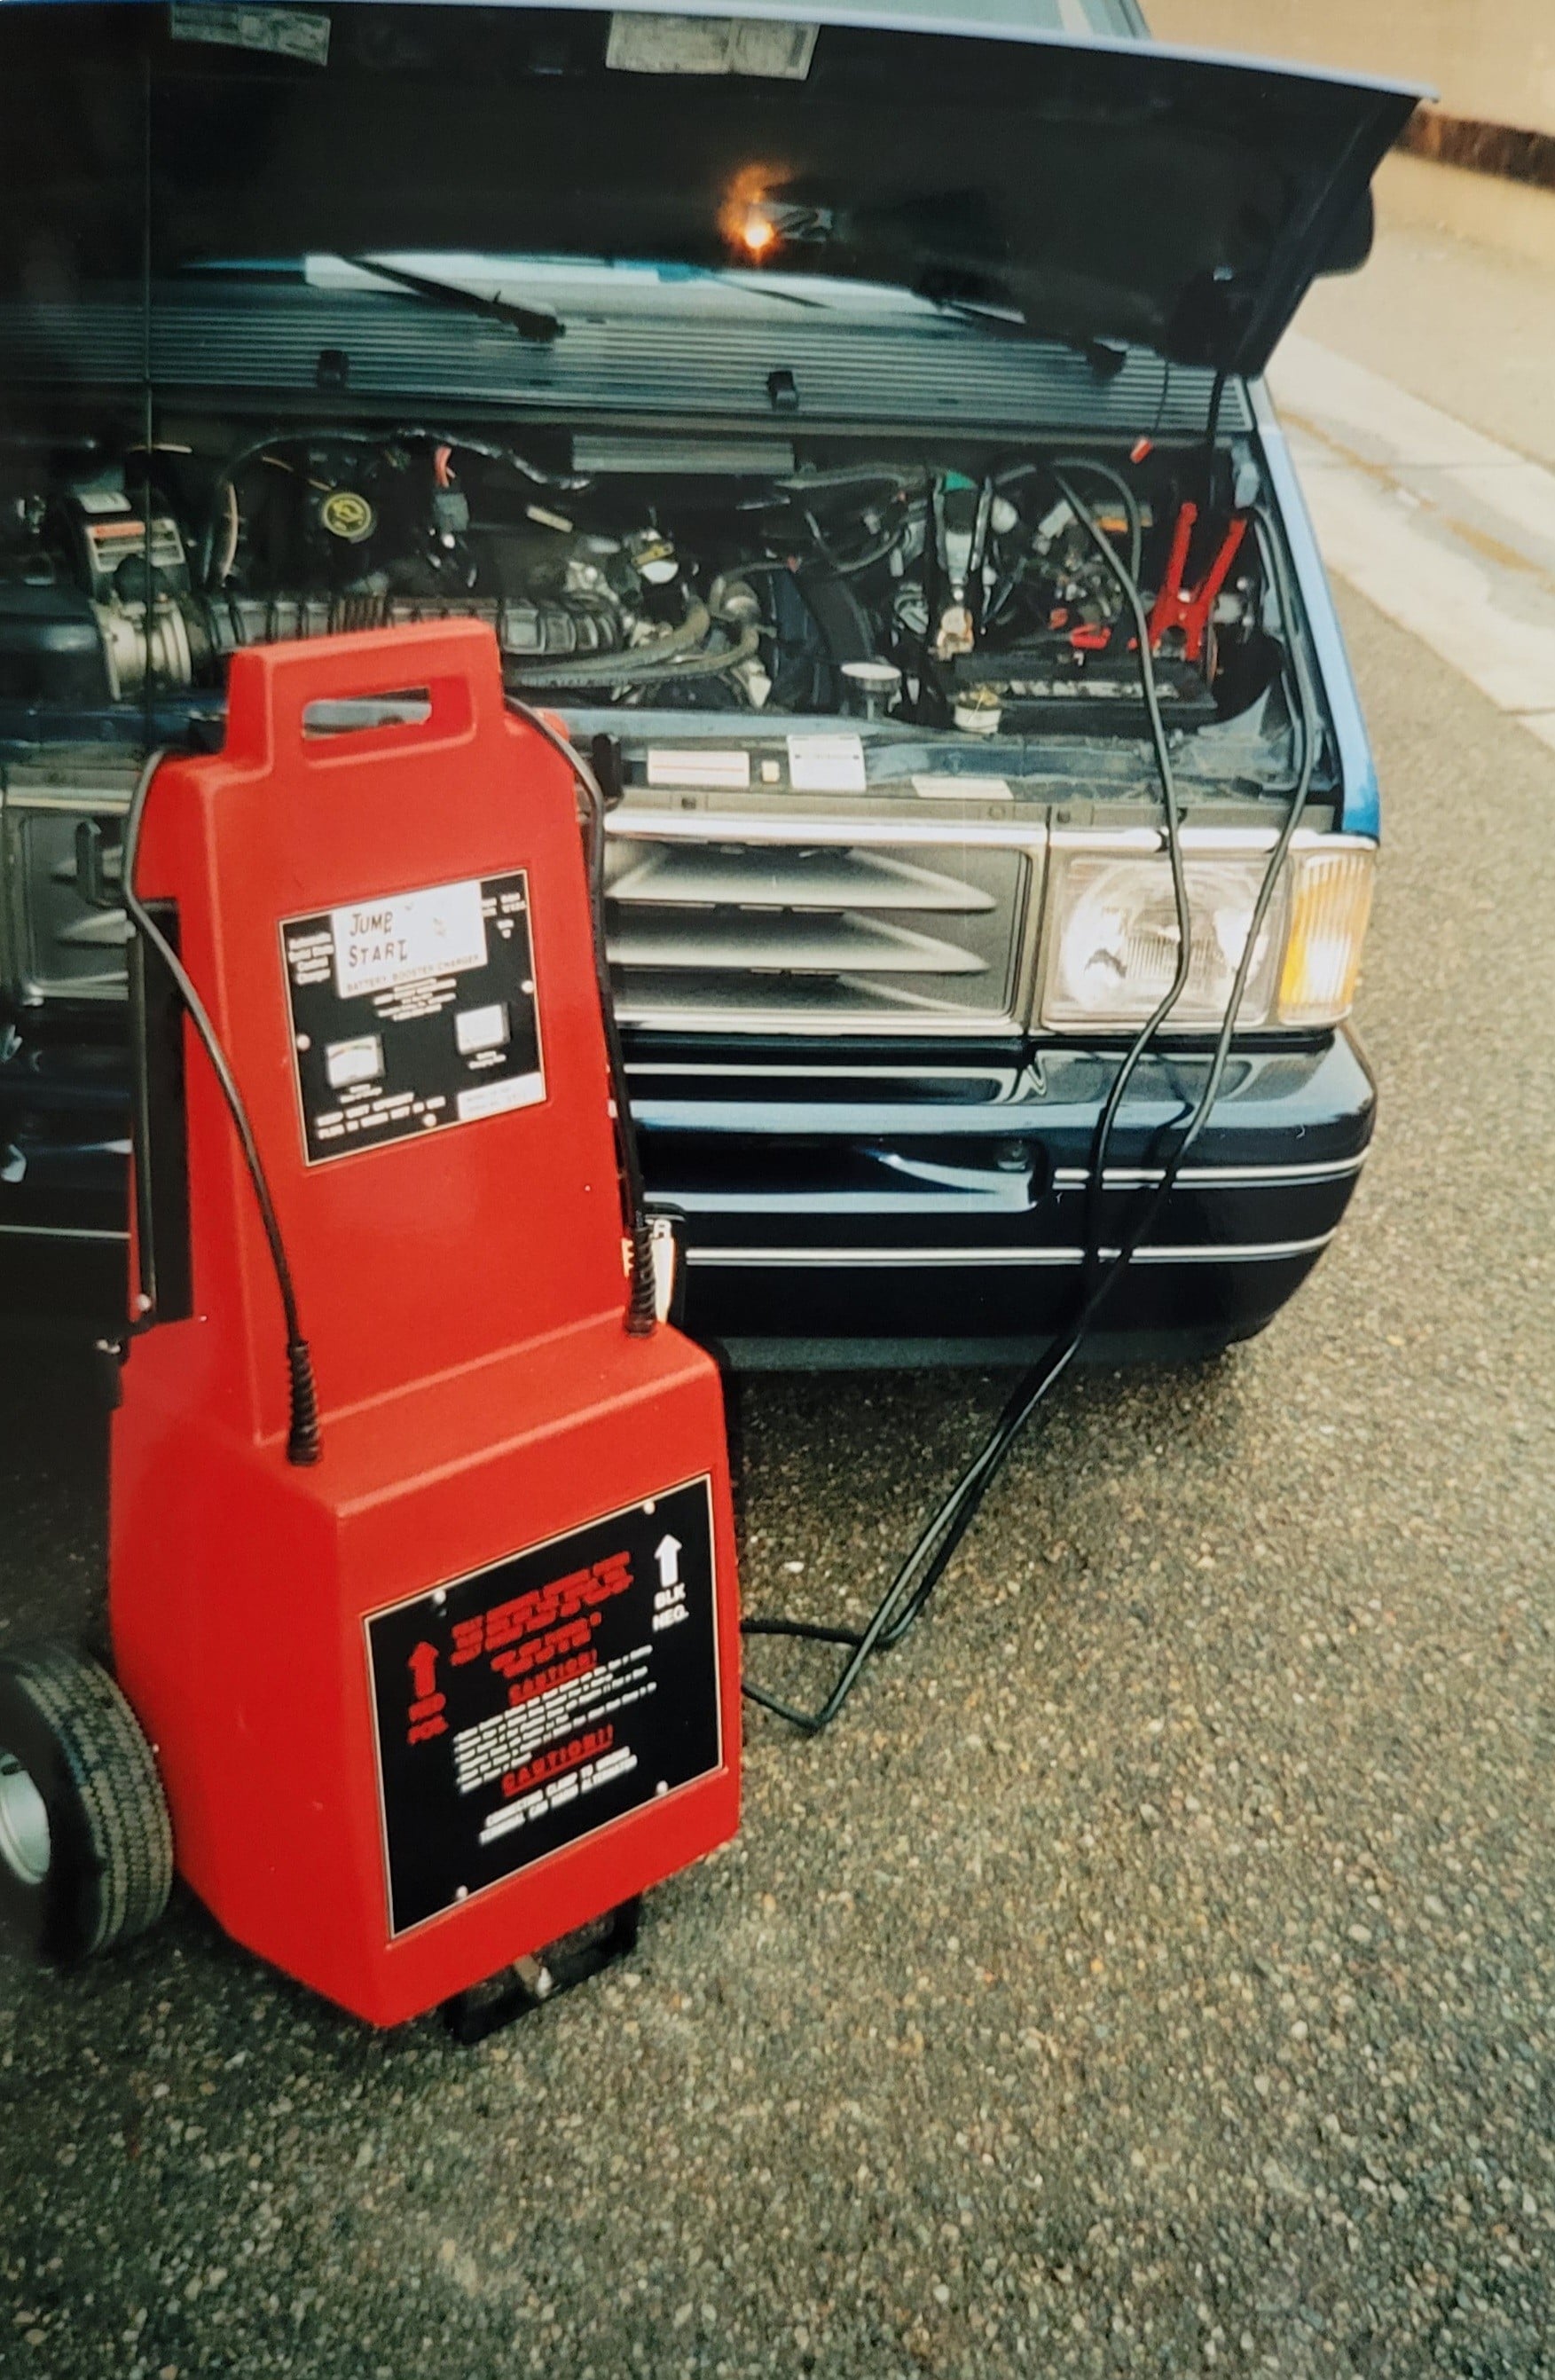 Jump Starter Connected To The Car